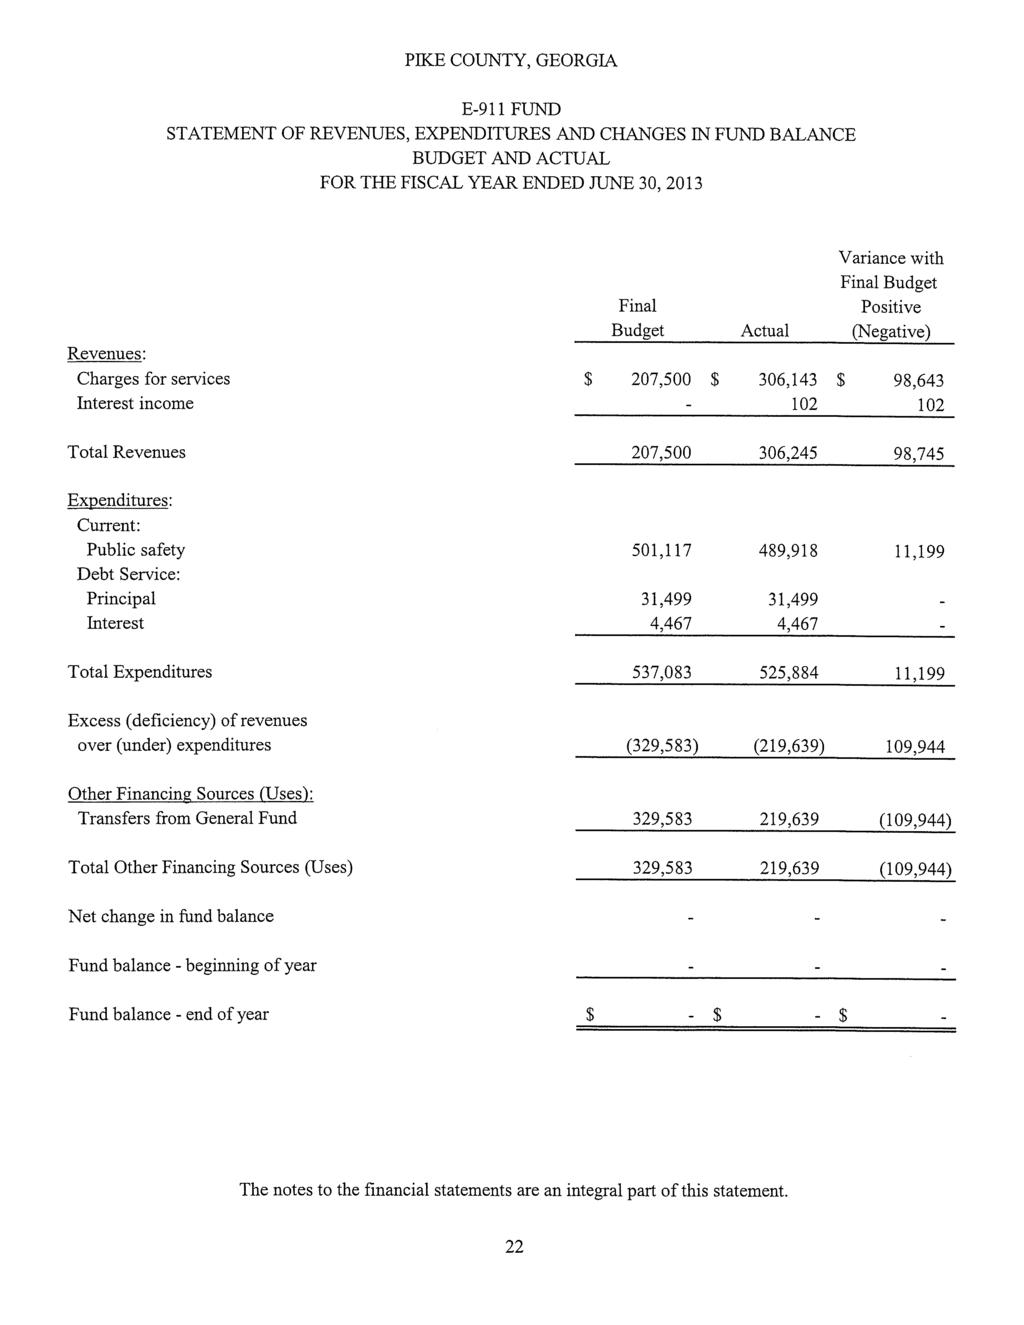 E-911 FUND STATEMENT OF REVENUES, EXPENDITURES AND CHANGES IN FUND BALANCE BUDGET AND ACTUAL FOR THE FISCAL YEAR ENDED JUNE 30, 2013 Revenues: Charges for services Interest income Total Revenues